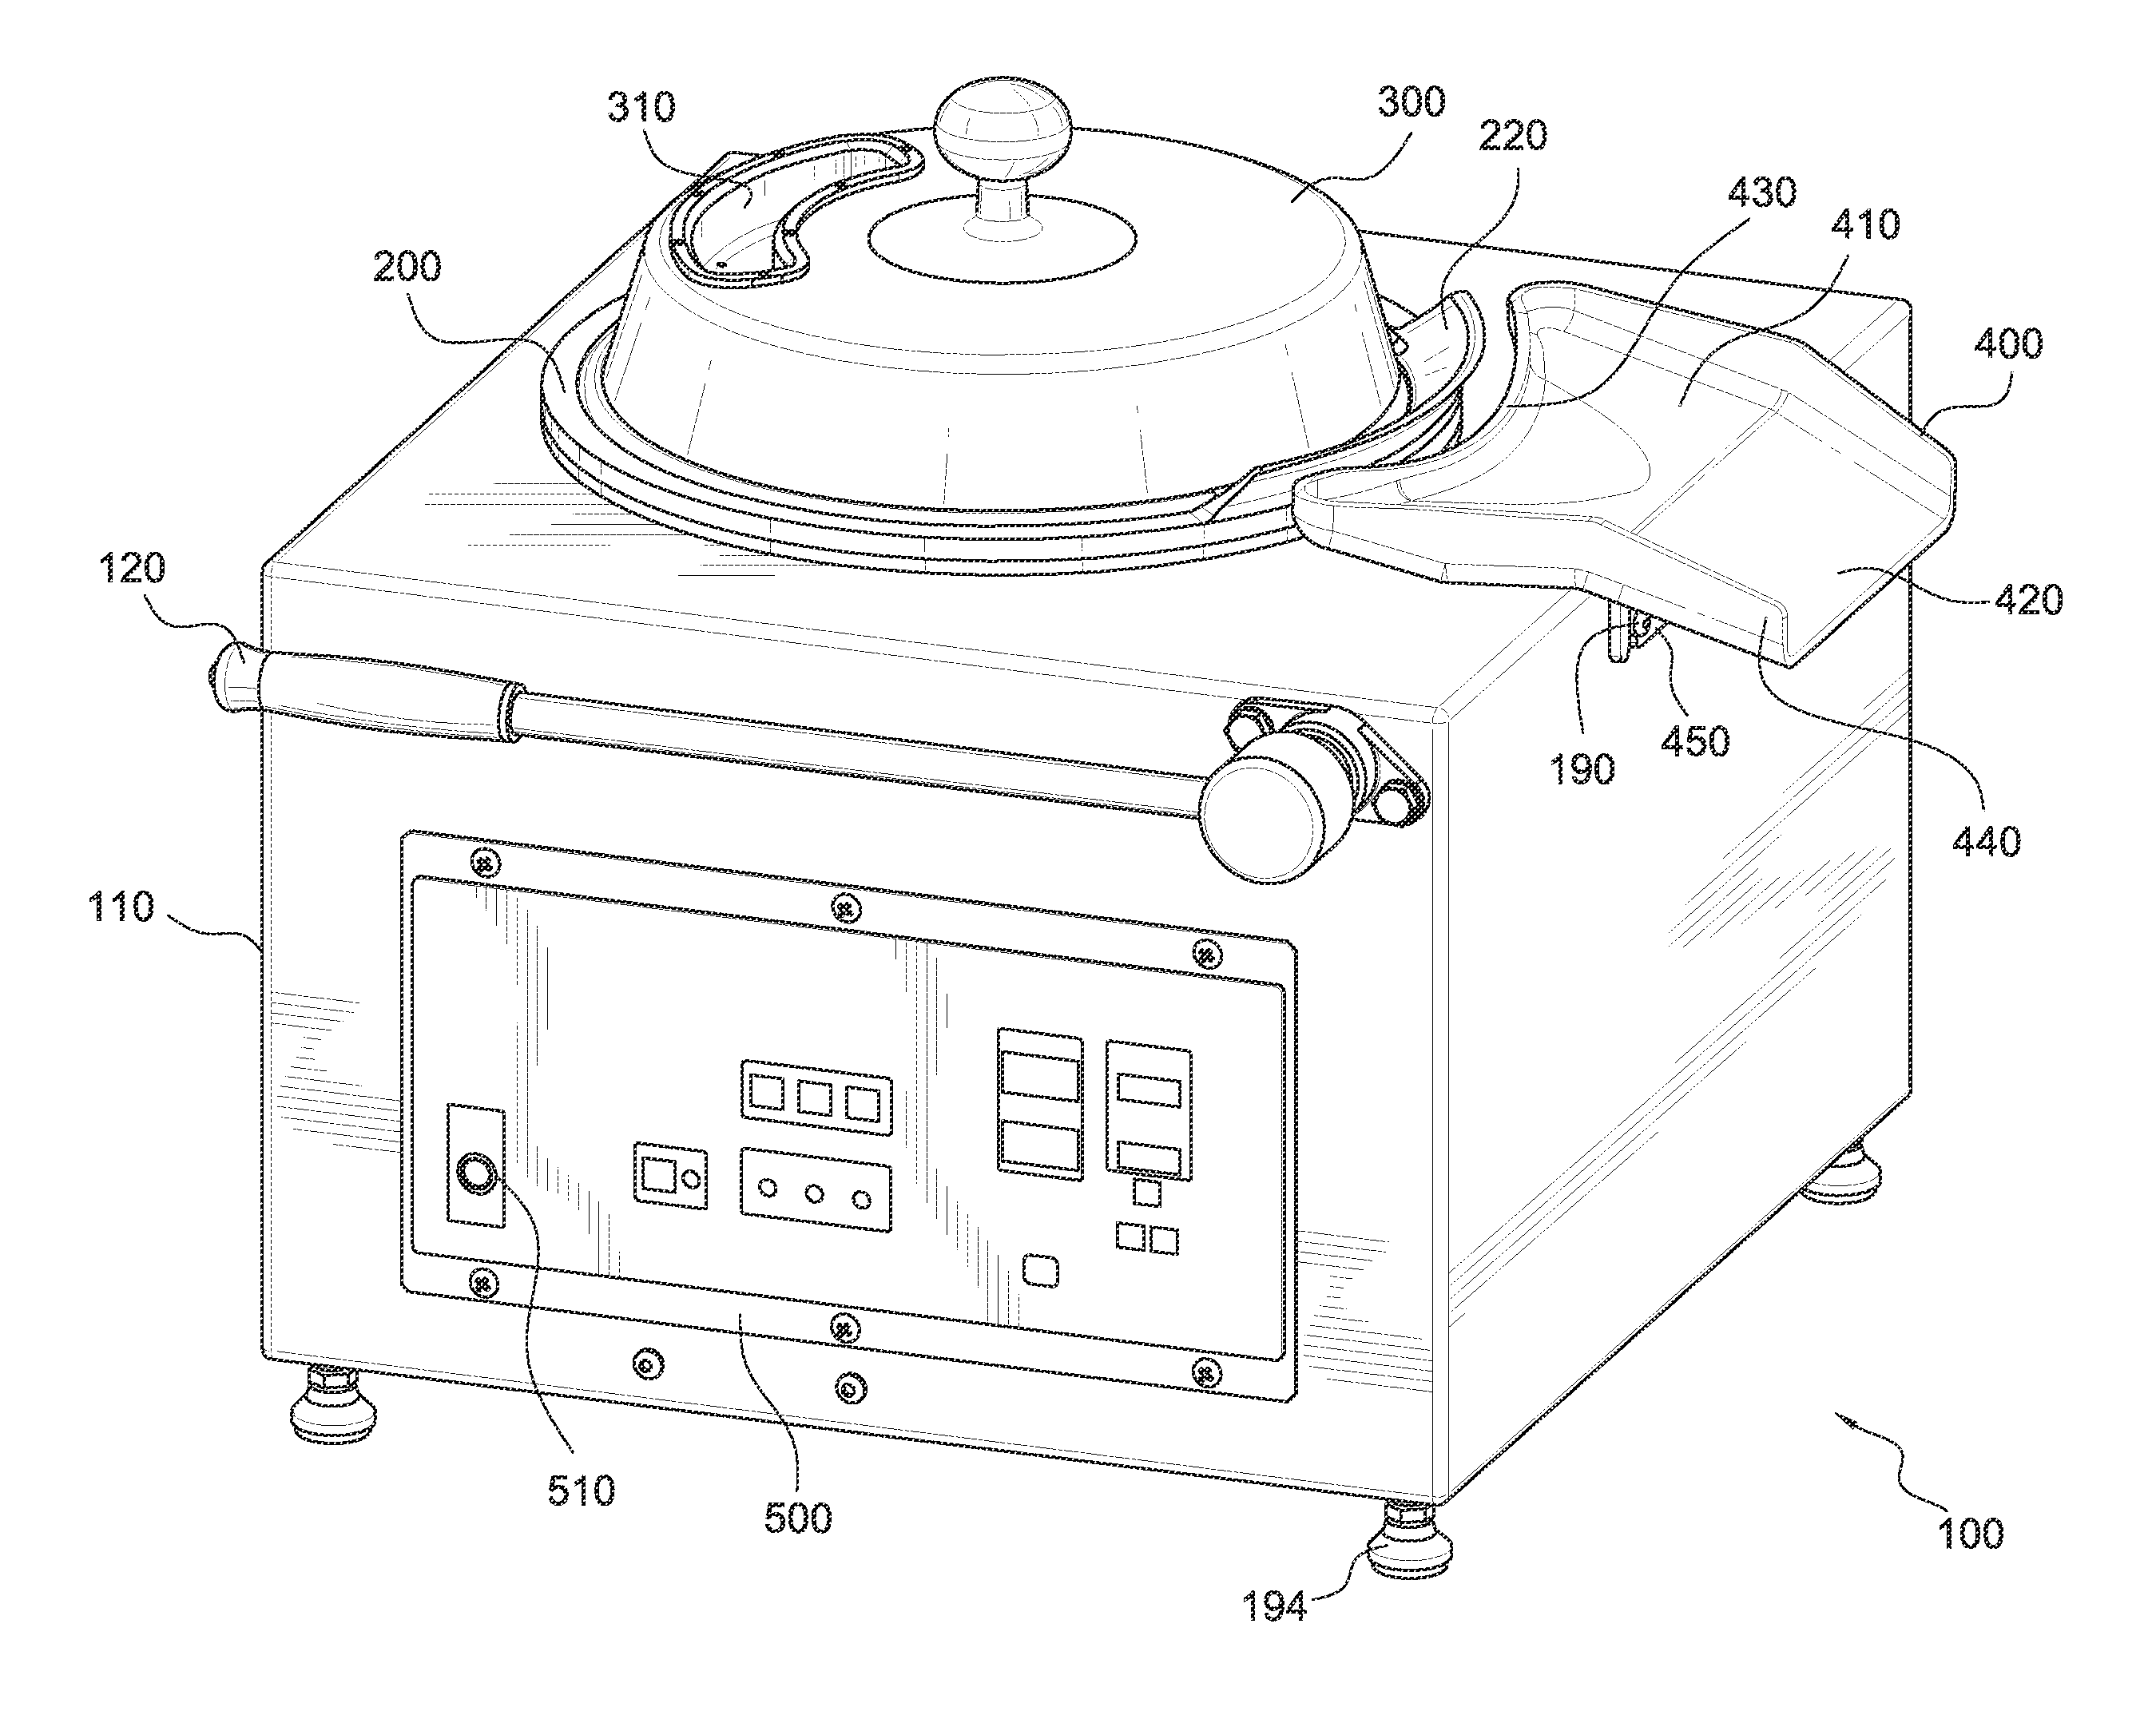 Roasting and glazing apparatus and method of cleaning thereof